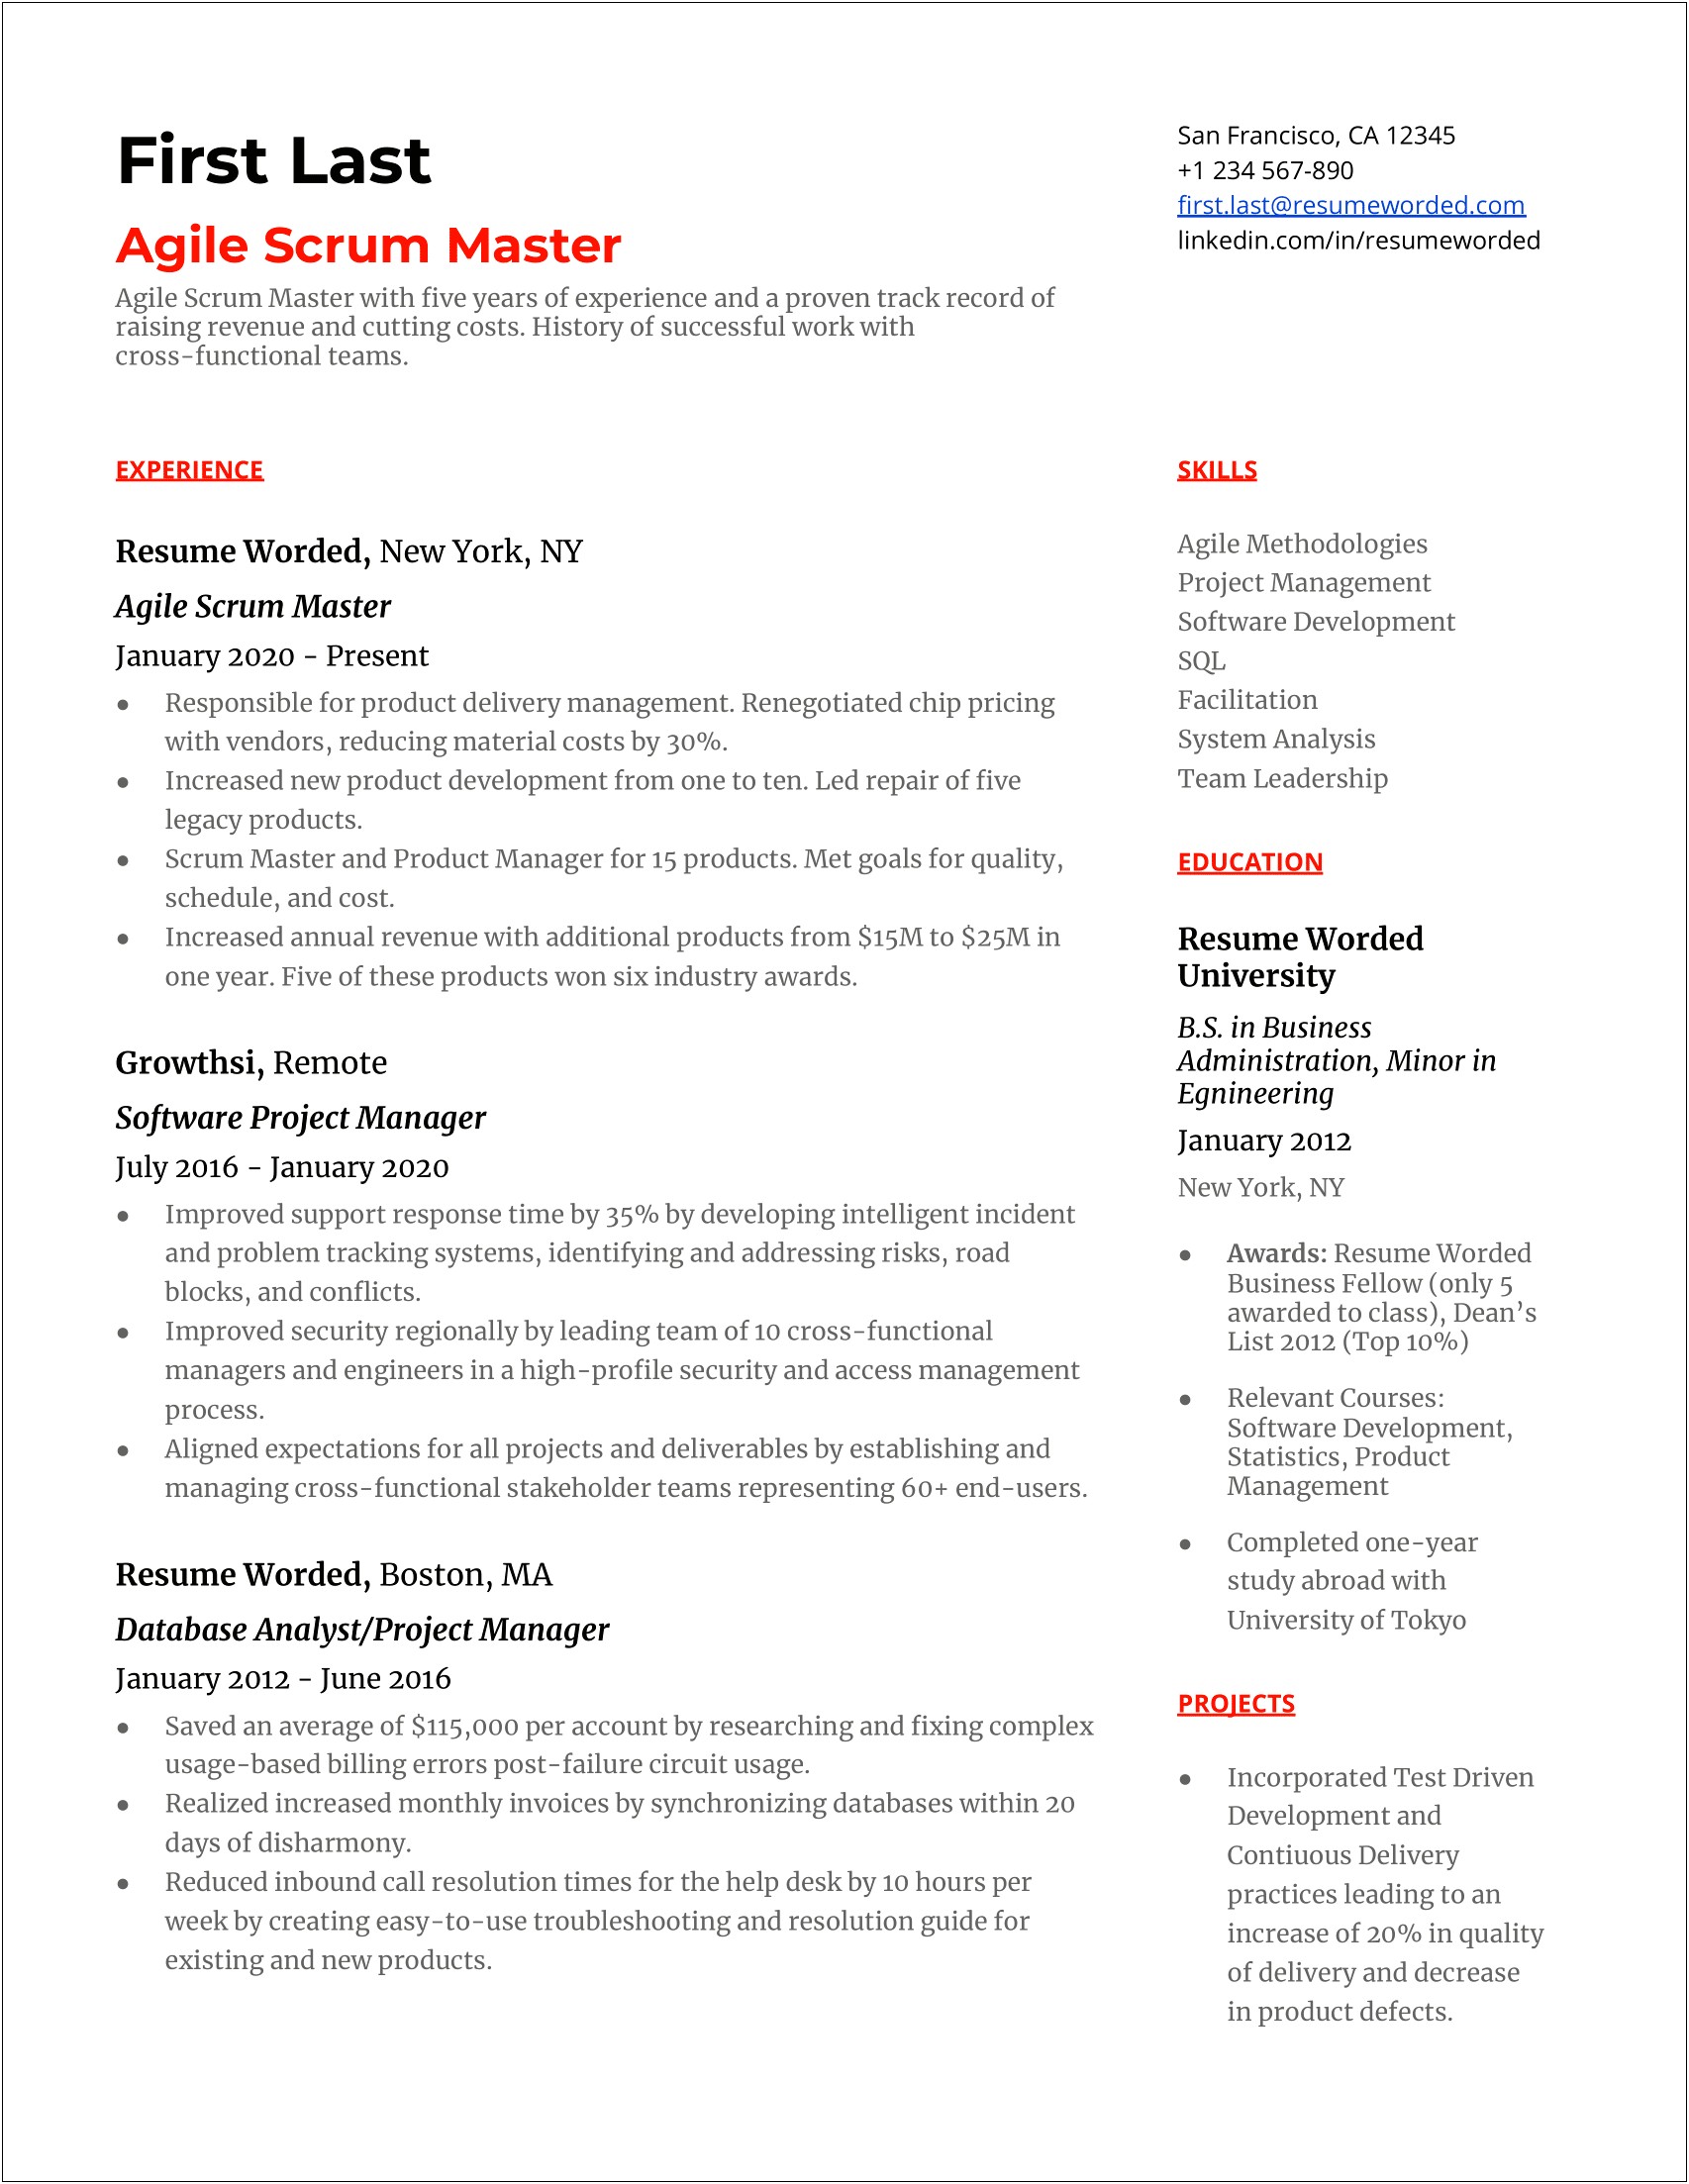 how to use cross functional in resume